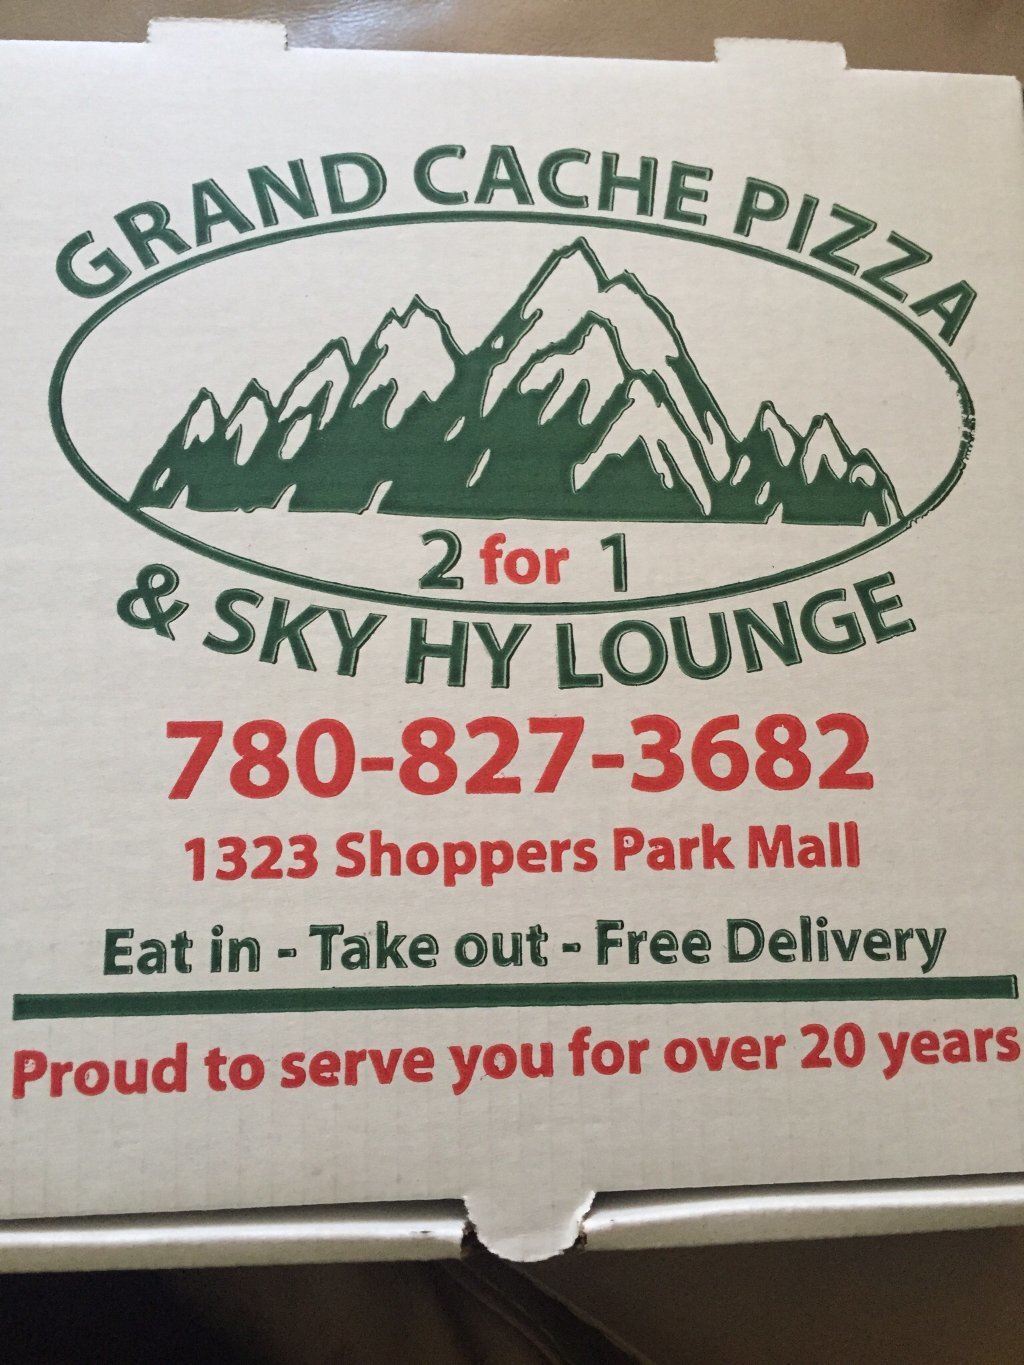 Grande Cache Pizza and Subs